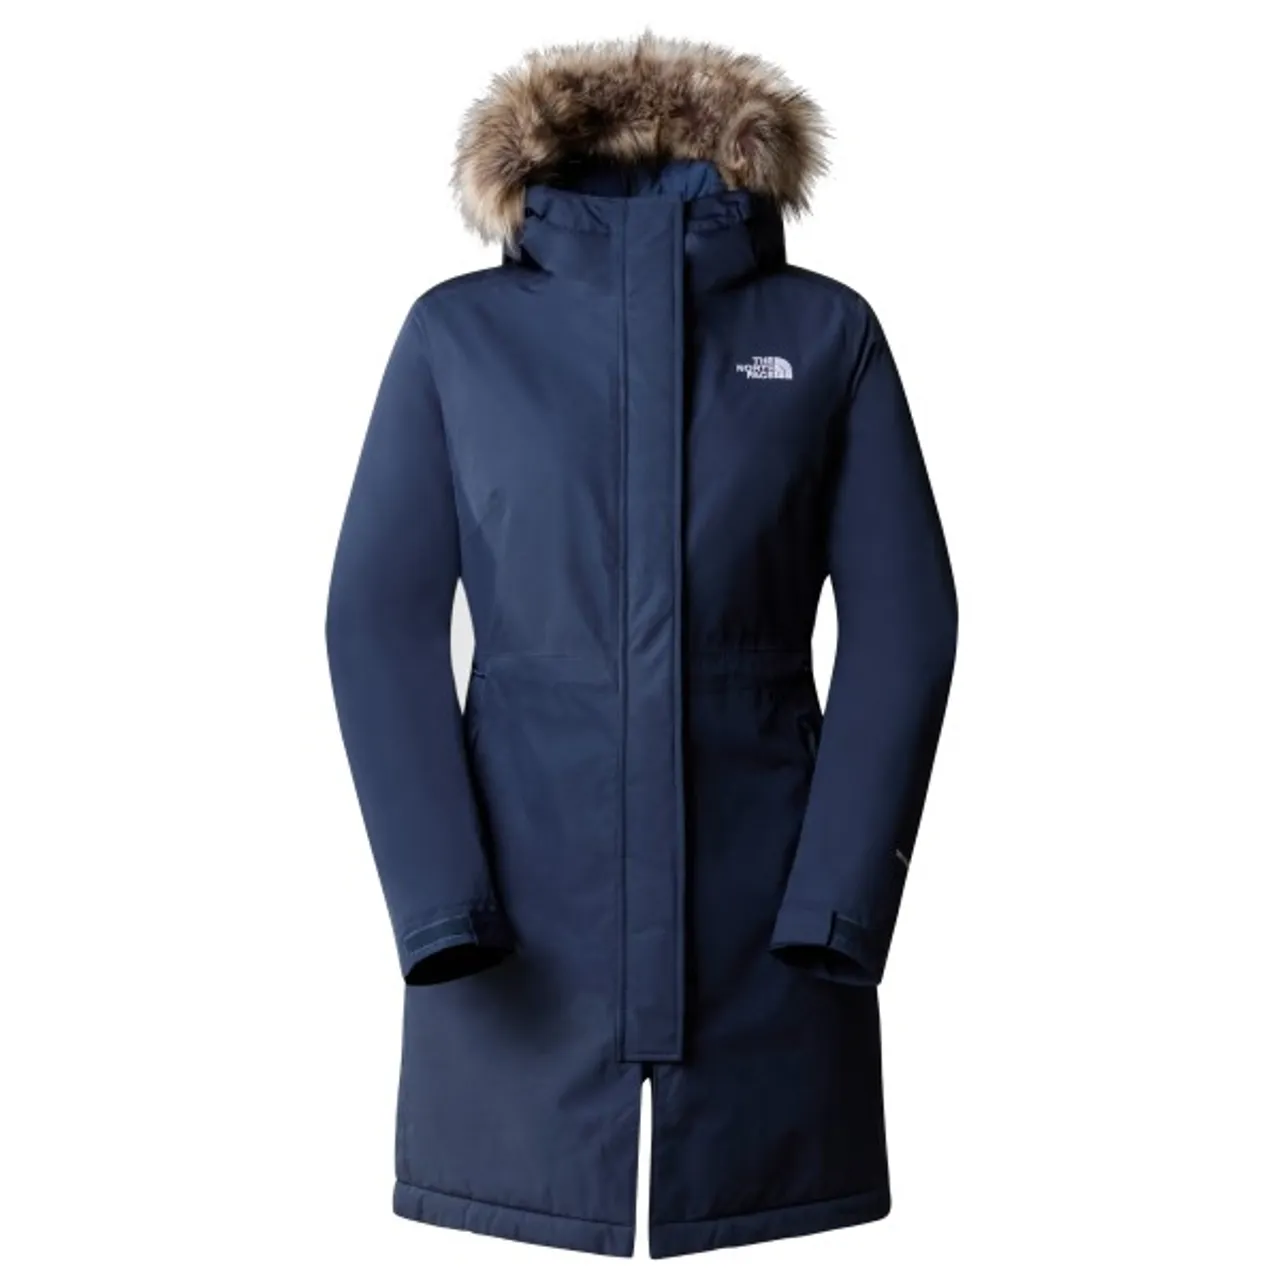 The North Face - Women's Recycled Zaneck Parka - Mantel